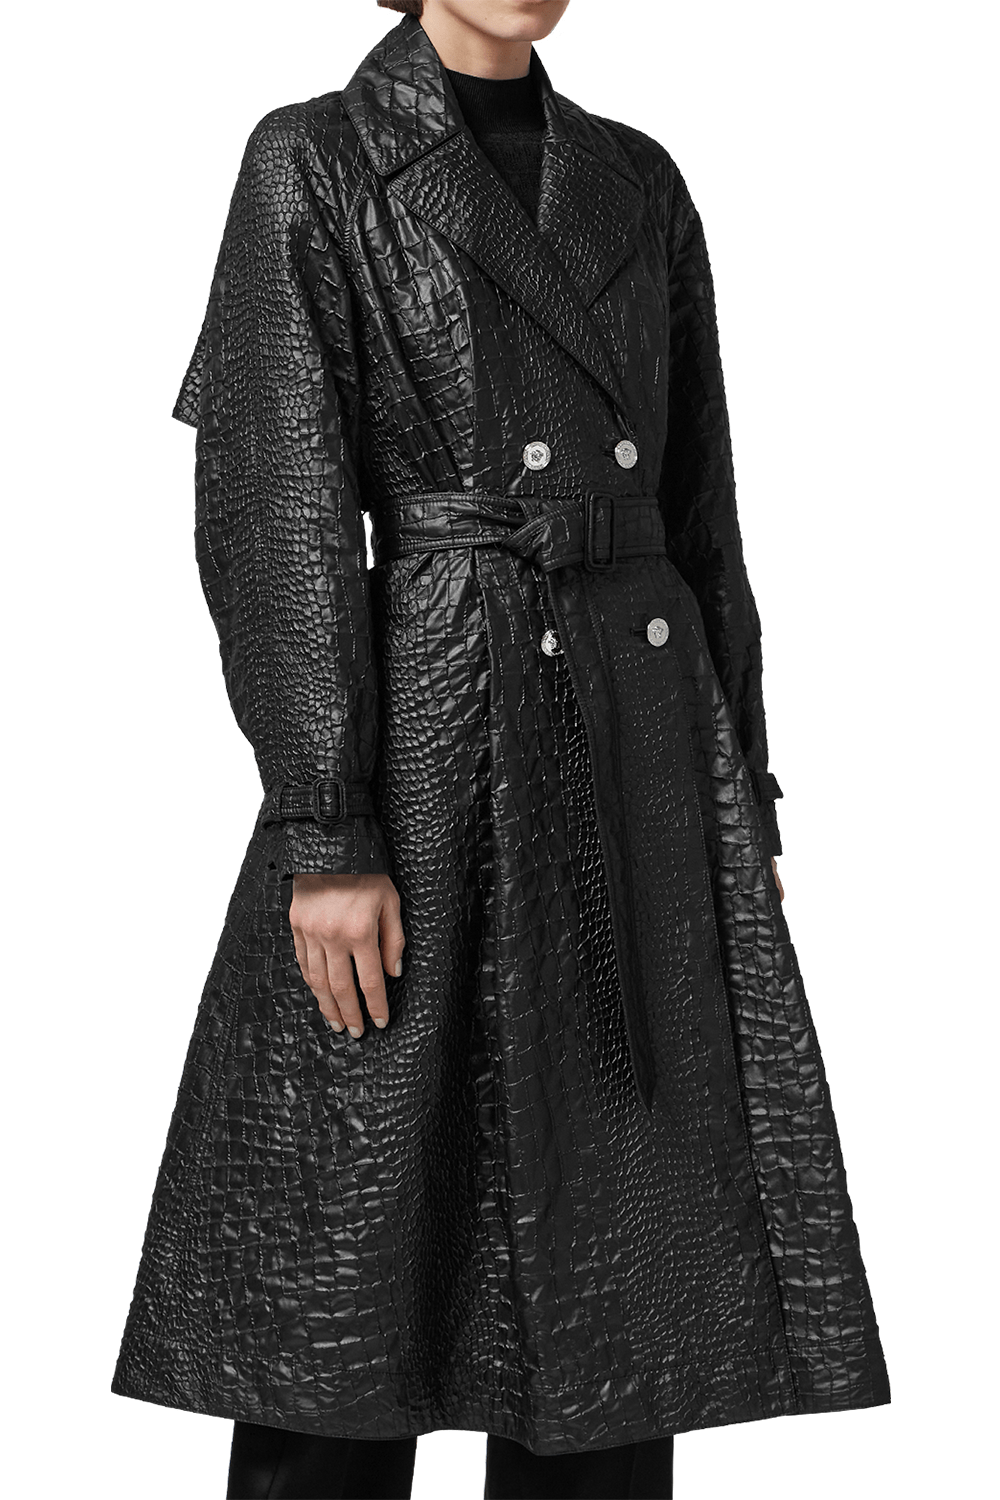 VERSACE-Croc-Lacquered Cloquet Trench Coat-